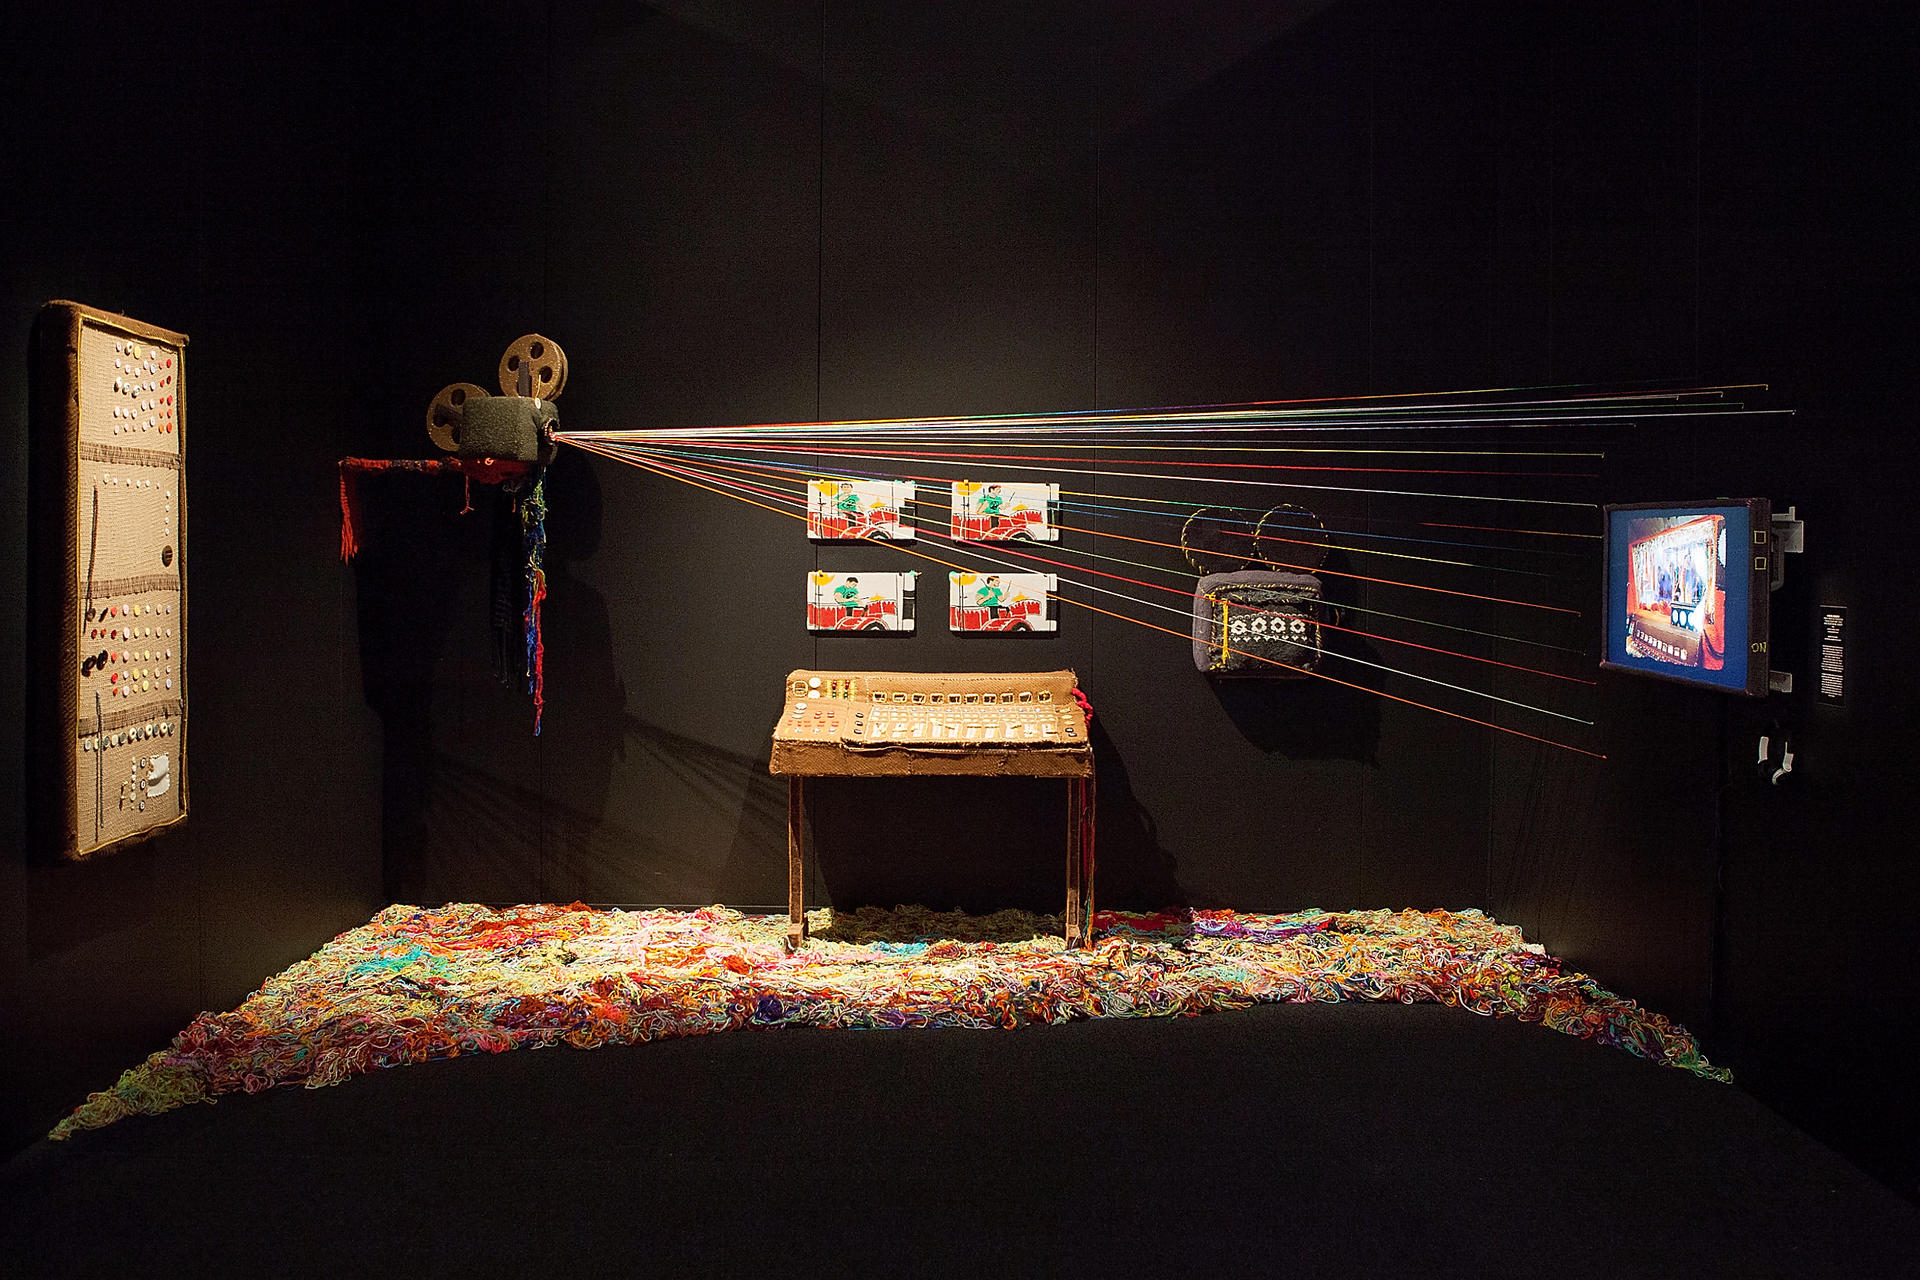 Seen at "Spectacle: The Music Video Exhibition" in Melbourne's ACMI: a yarn-bombed media room. Photos: Mark Gambino